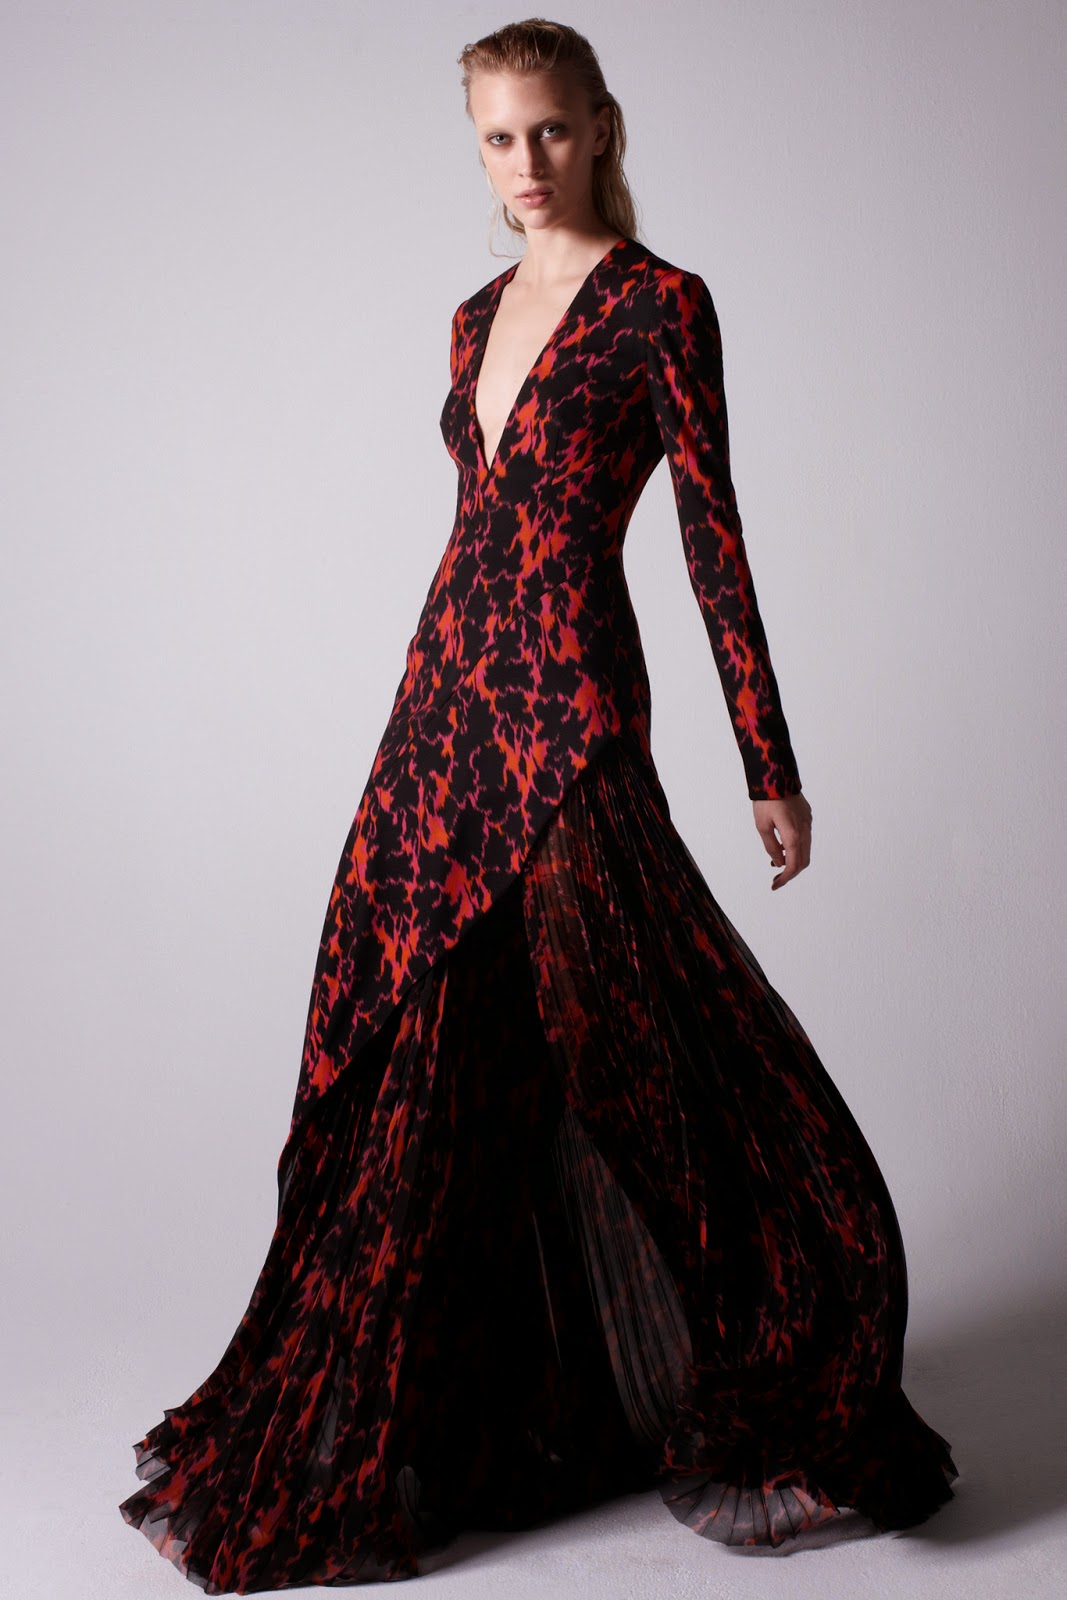 Serendipitylands: J. MENDEL COLLECTION PRE-FALL 2015